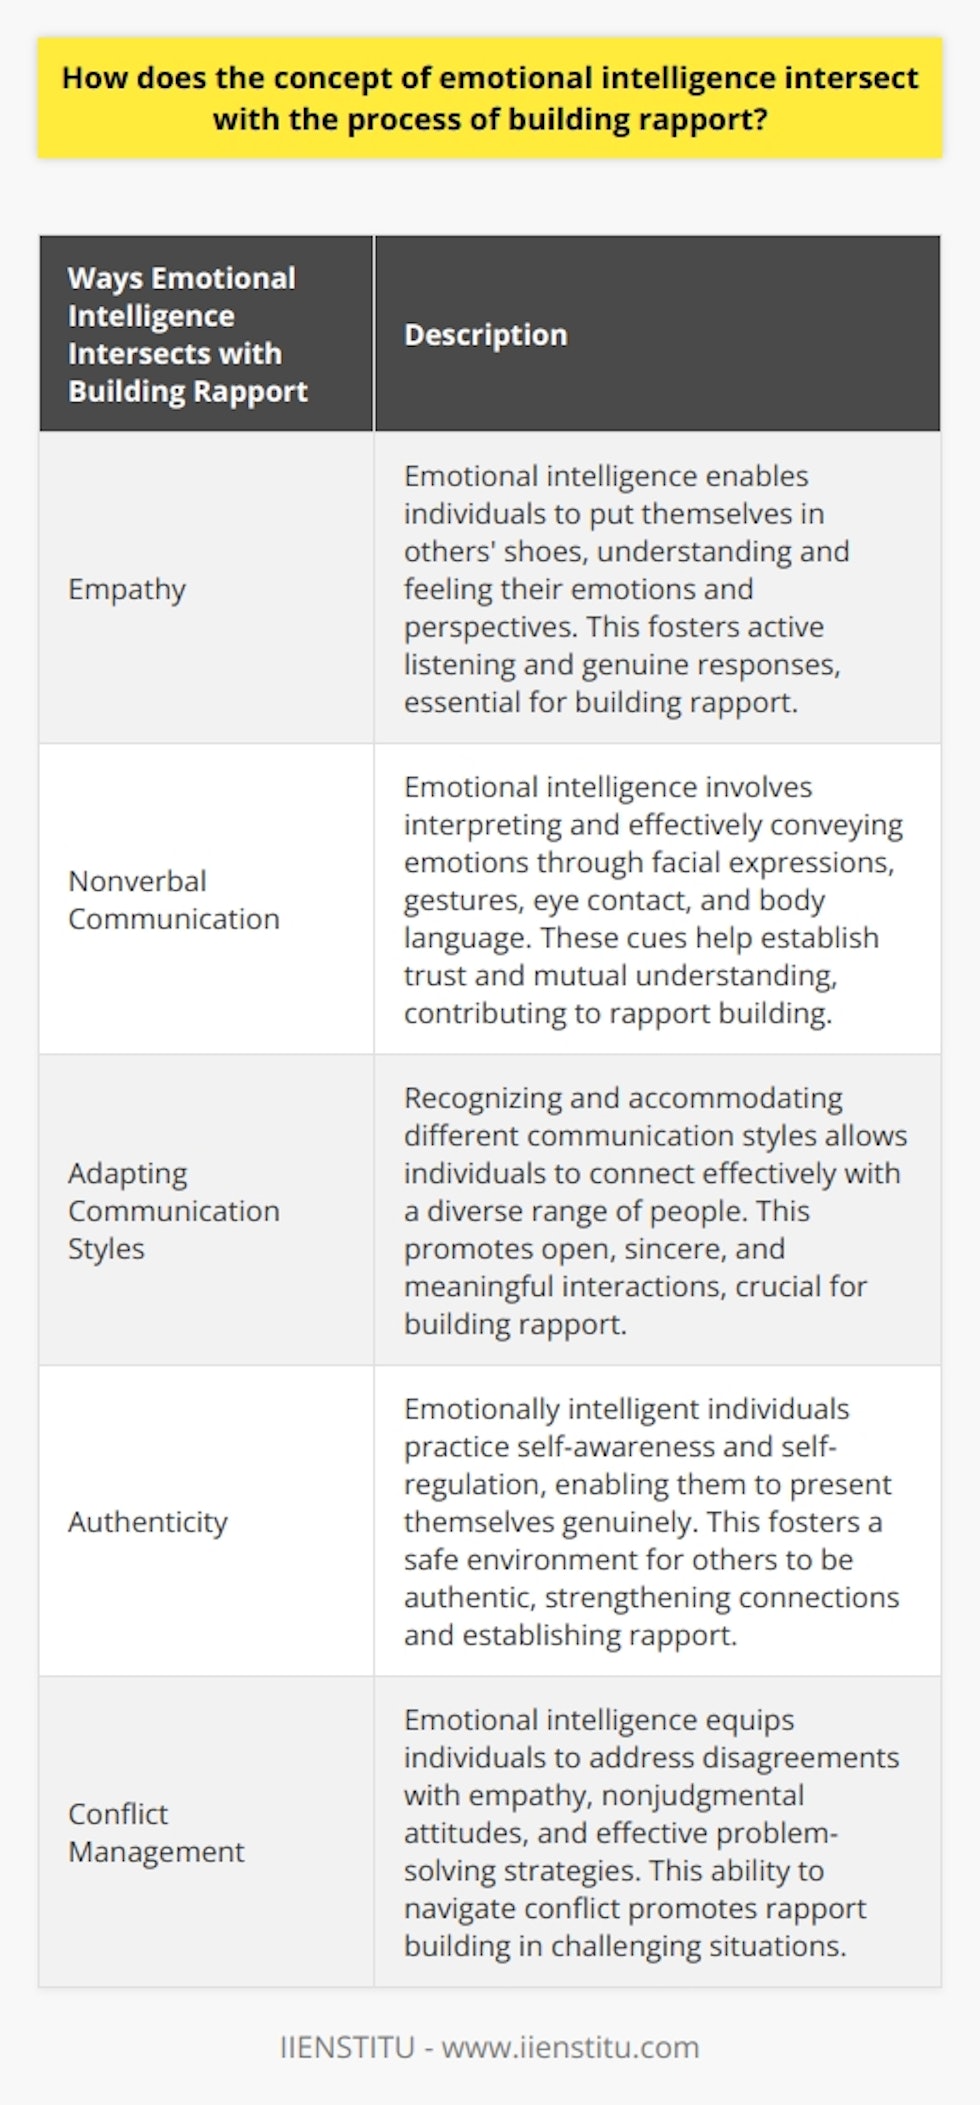 Emotional intelligence (EI) plays a crucial role in building rapport as it involves understanding and managing one's own emotions and empathizing with others. EI enables individuals to perceive and interpret the emotions of those around them, providing valuable insights that enhance communication and facilitate the establishment of meaningful connections.Establishing rapport requires empathy, a critical aspect of emotional intelligence. Empathetic individuals can put themselves in another person's shoes, feeling or understanding their emotions and perspectives. This ability enables them to engage in active listening, where they pay attention and respond genuinely to the thoughts and feelings shared by others. Active listening demonstrates a genuine interest in others, which is crucial in building rapport.Nonverbal communication is another critical component of emotional intelligence that intersects with the process of building rapport. Interpreting and effectively conveying emotions through facial expressions, gestures, eye contact, and body language help establish trust and mutual understanding. These nonverbal cues contribute significantly to the development of rapport, as they provide valuable emotional feedback that strengthens connections between individuals.Emotional intelligence also involves the adaptation of one's communication style to suit the needs and preferences of others. By recognizing and accommodating different communication styles, individuals can effectively connect with a diverse range of people, ensuring that rapport is built quickly and effectively. This aspect of EI allows for more open, sincere, and meaningful interactions, which are essential for rapport building.Rapport is built on a foundation of trust and authenticity. Emotionally intelligent individuals practice self-awareness and self-regulation, enabling them to present themselves genuinely to others. This authenticity fosters a safe environment in which others can also be genuine, resulting in stronger connections and an increased likelihood of building lasting rapport.Emotionally intelligent individuals are equipped to handle conflict effectively, further promoting the process of building rapport. By addressing disagreements with empathy, nonjudgmental attitudes, and effective problem-solving strategies, individuals with high EI can maintain rapport during challenging situations. This ability to navigate conflict contributes to the overall success of rapport building in both personal and professional settings.In conclusion, emotional intelligence intersects with the process of building rapport in various ways, enabling individuals to effectively communicate, understand others, and establish trust. By practicing empathy, active listening, nonverbal communication, adapting communication styles, and managing conflict, individuals with high emotional intelligence are well-equipped to build meaningful relationships and establish rapport with others.